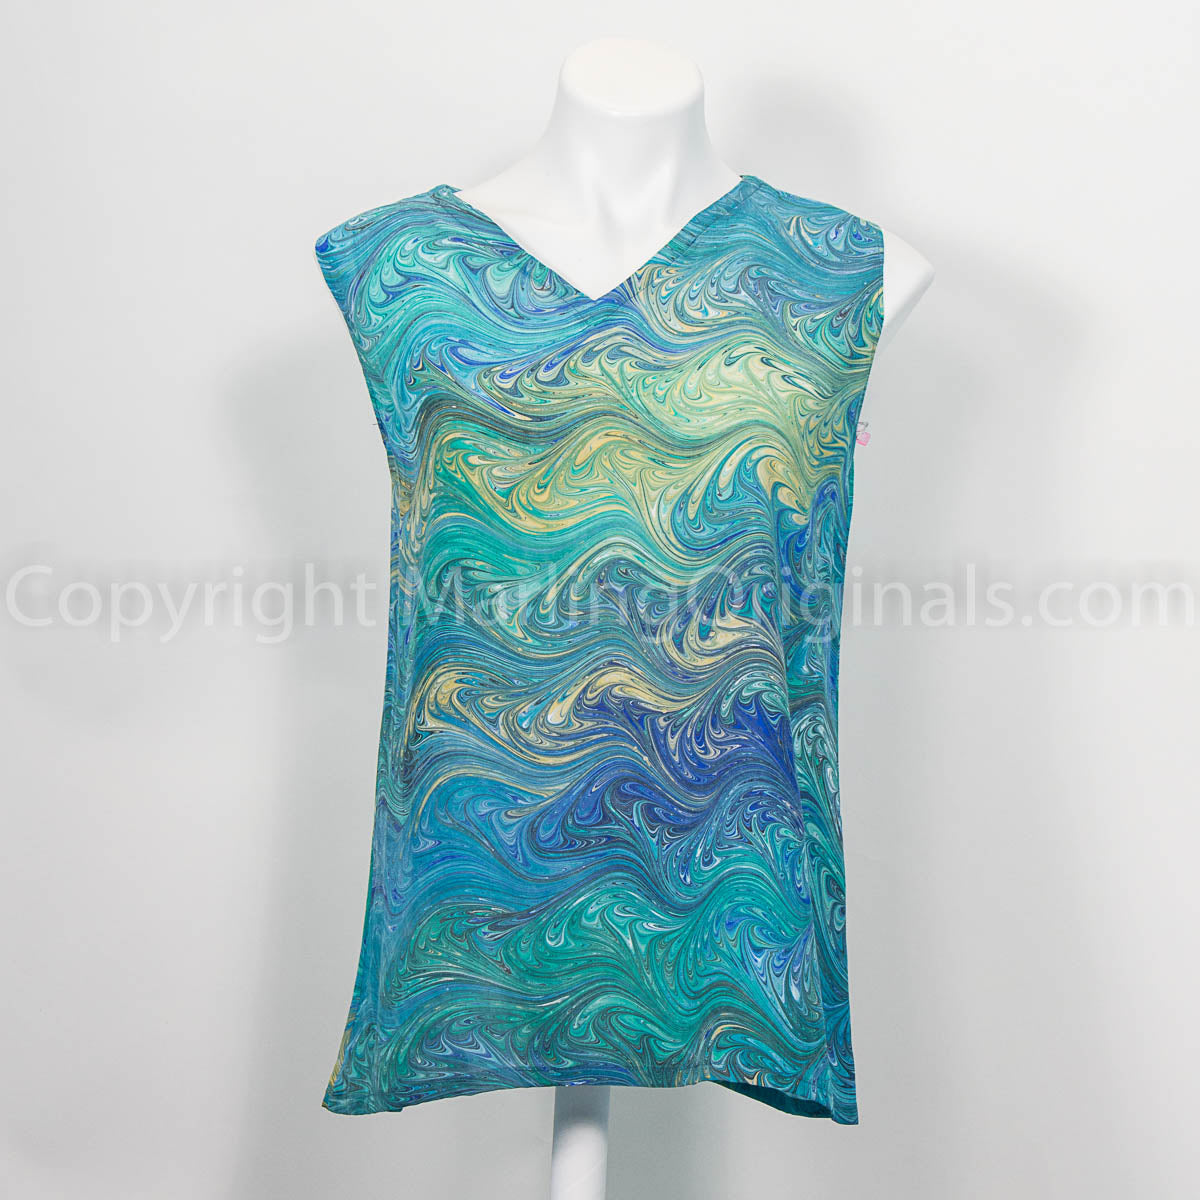 silk tank top marbled in green, blue and yellow tones.  v neck